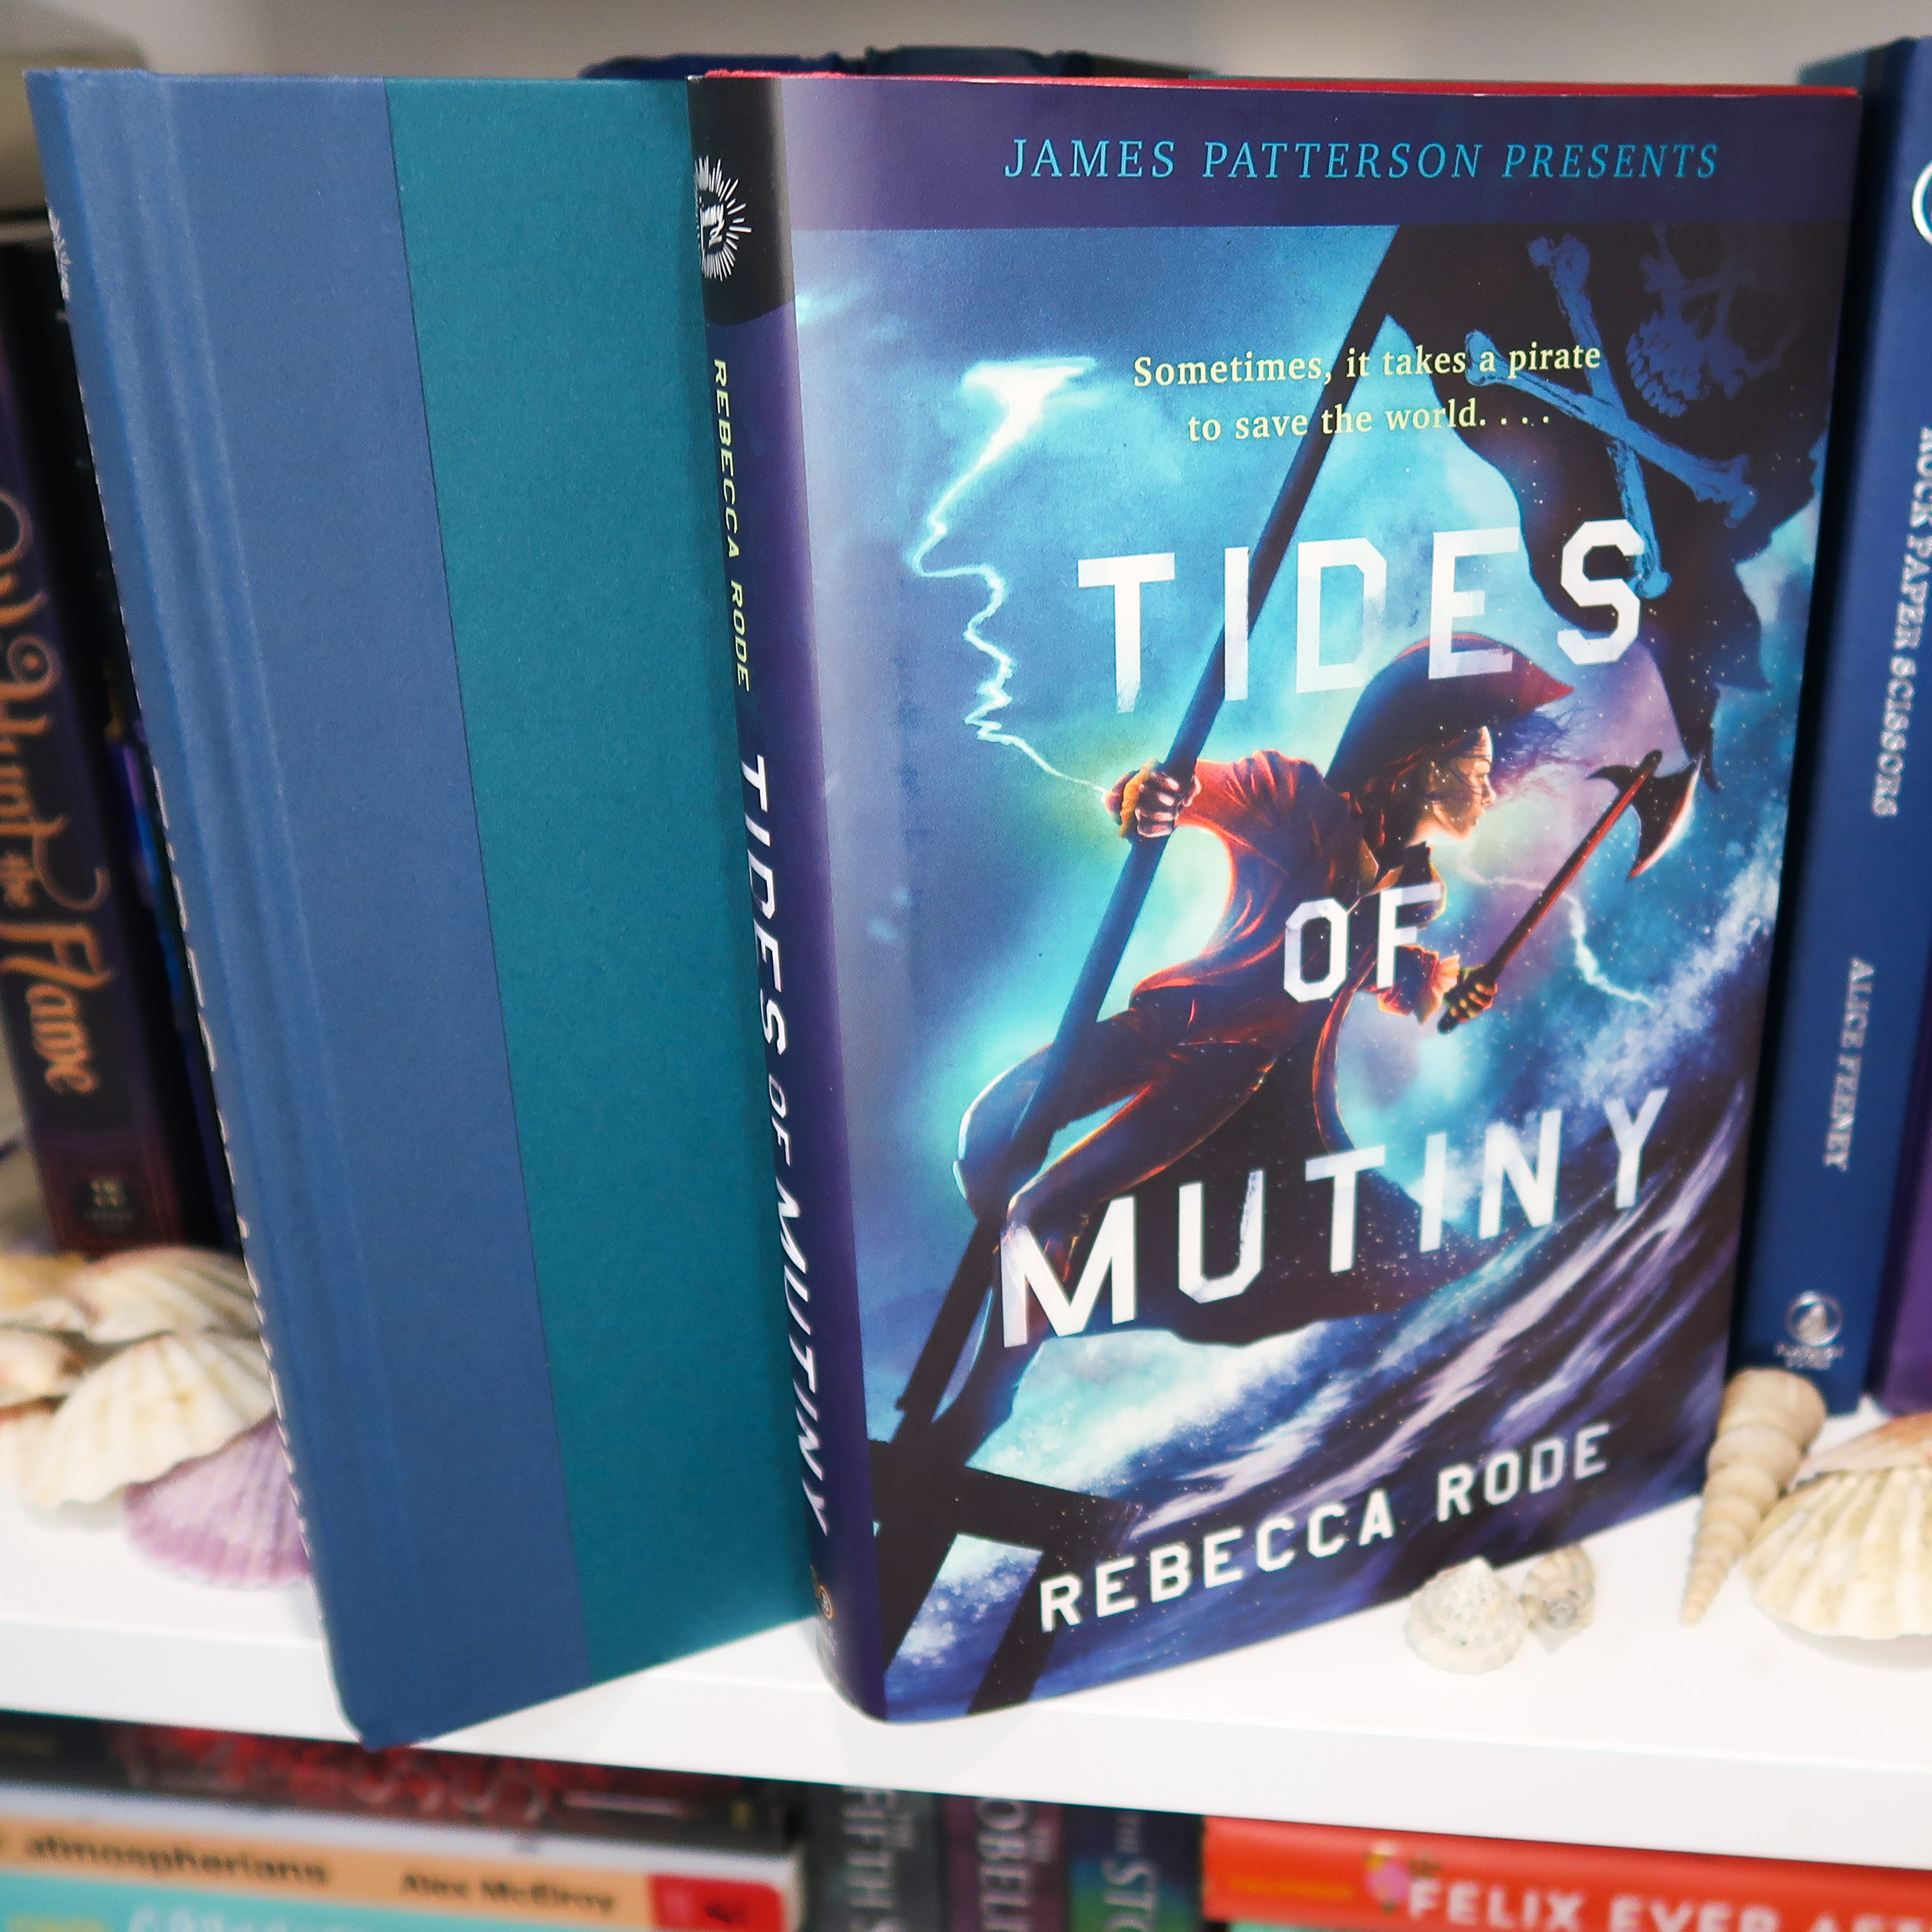 Instagram image of the book "Tides of Mutiny" by Rebecca Rode